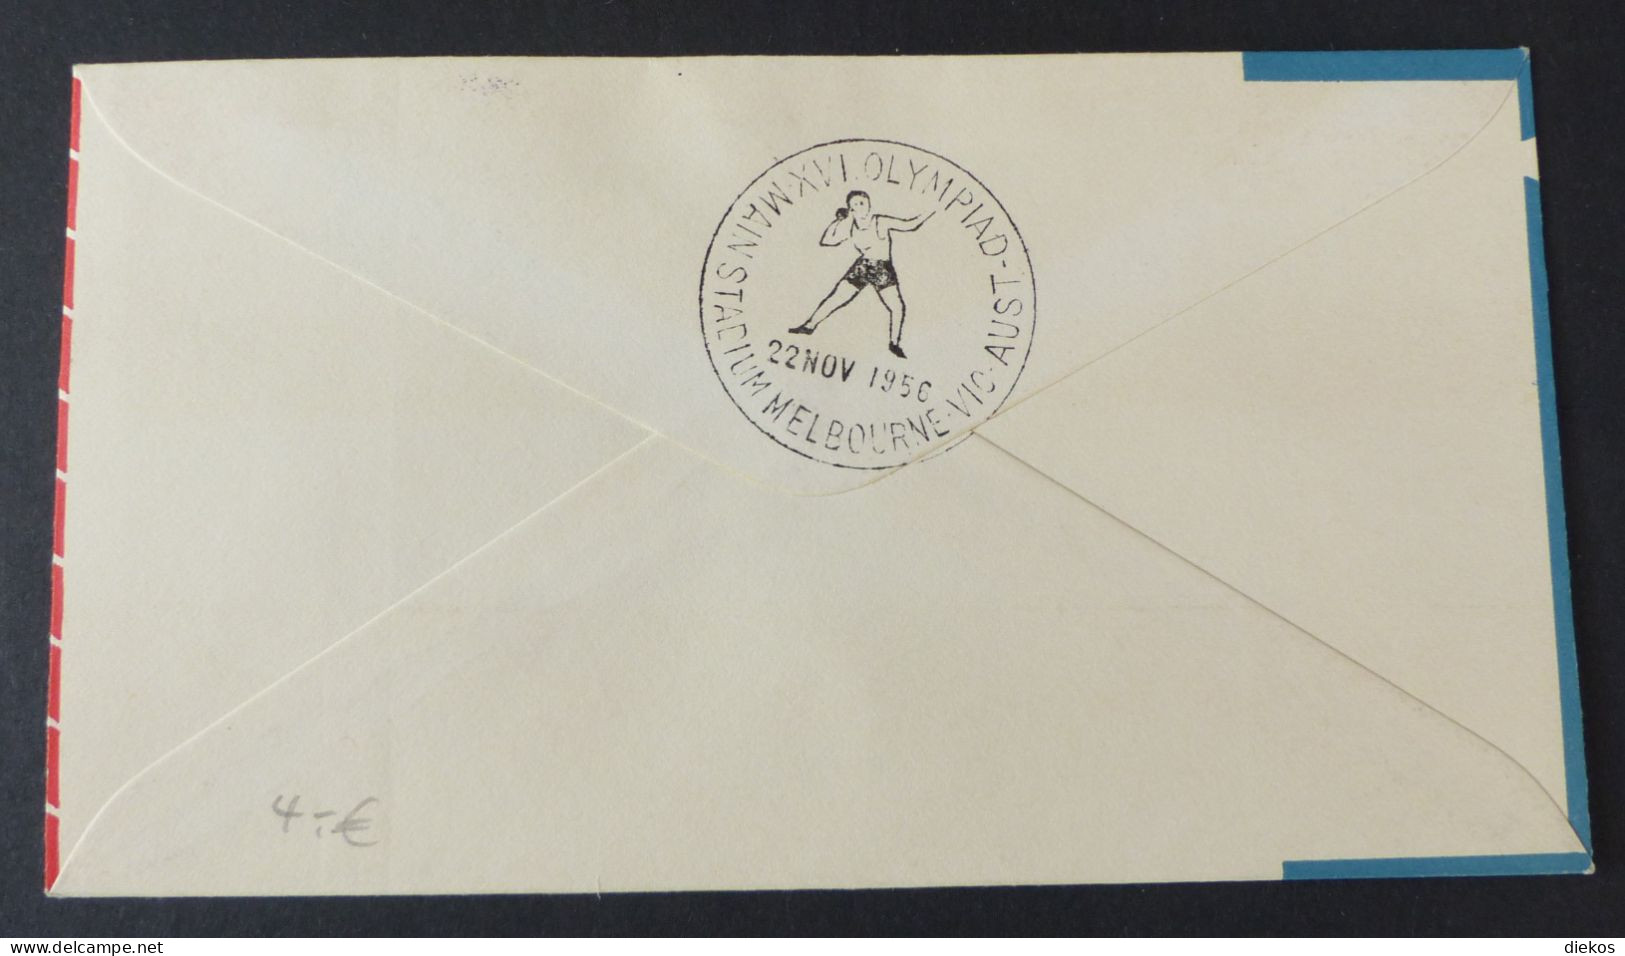 Grichenland  Air Letter 1956  Qantas Olympia Athens To Australia #cover5677 - Lettres & Documents